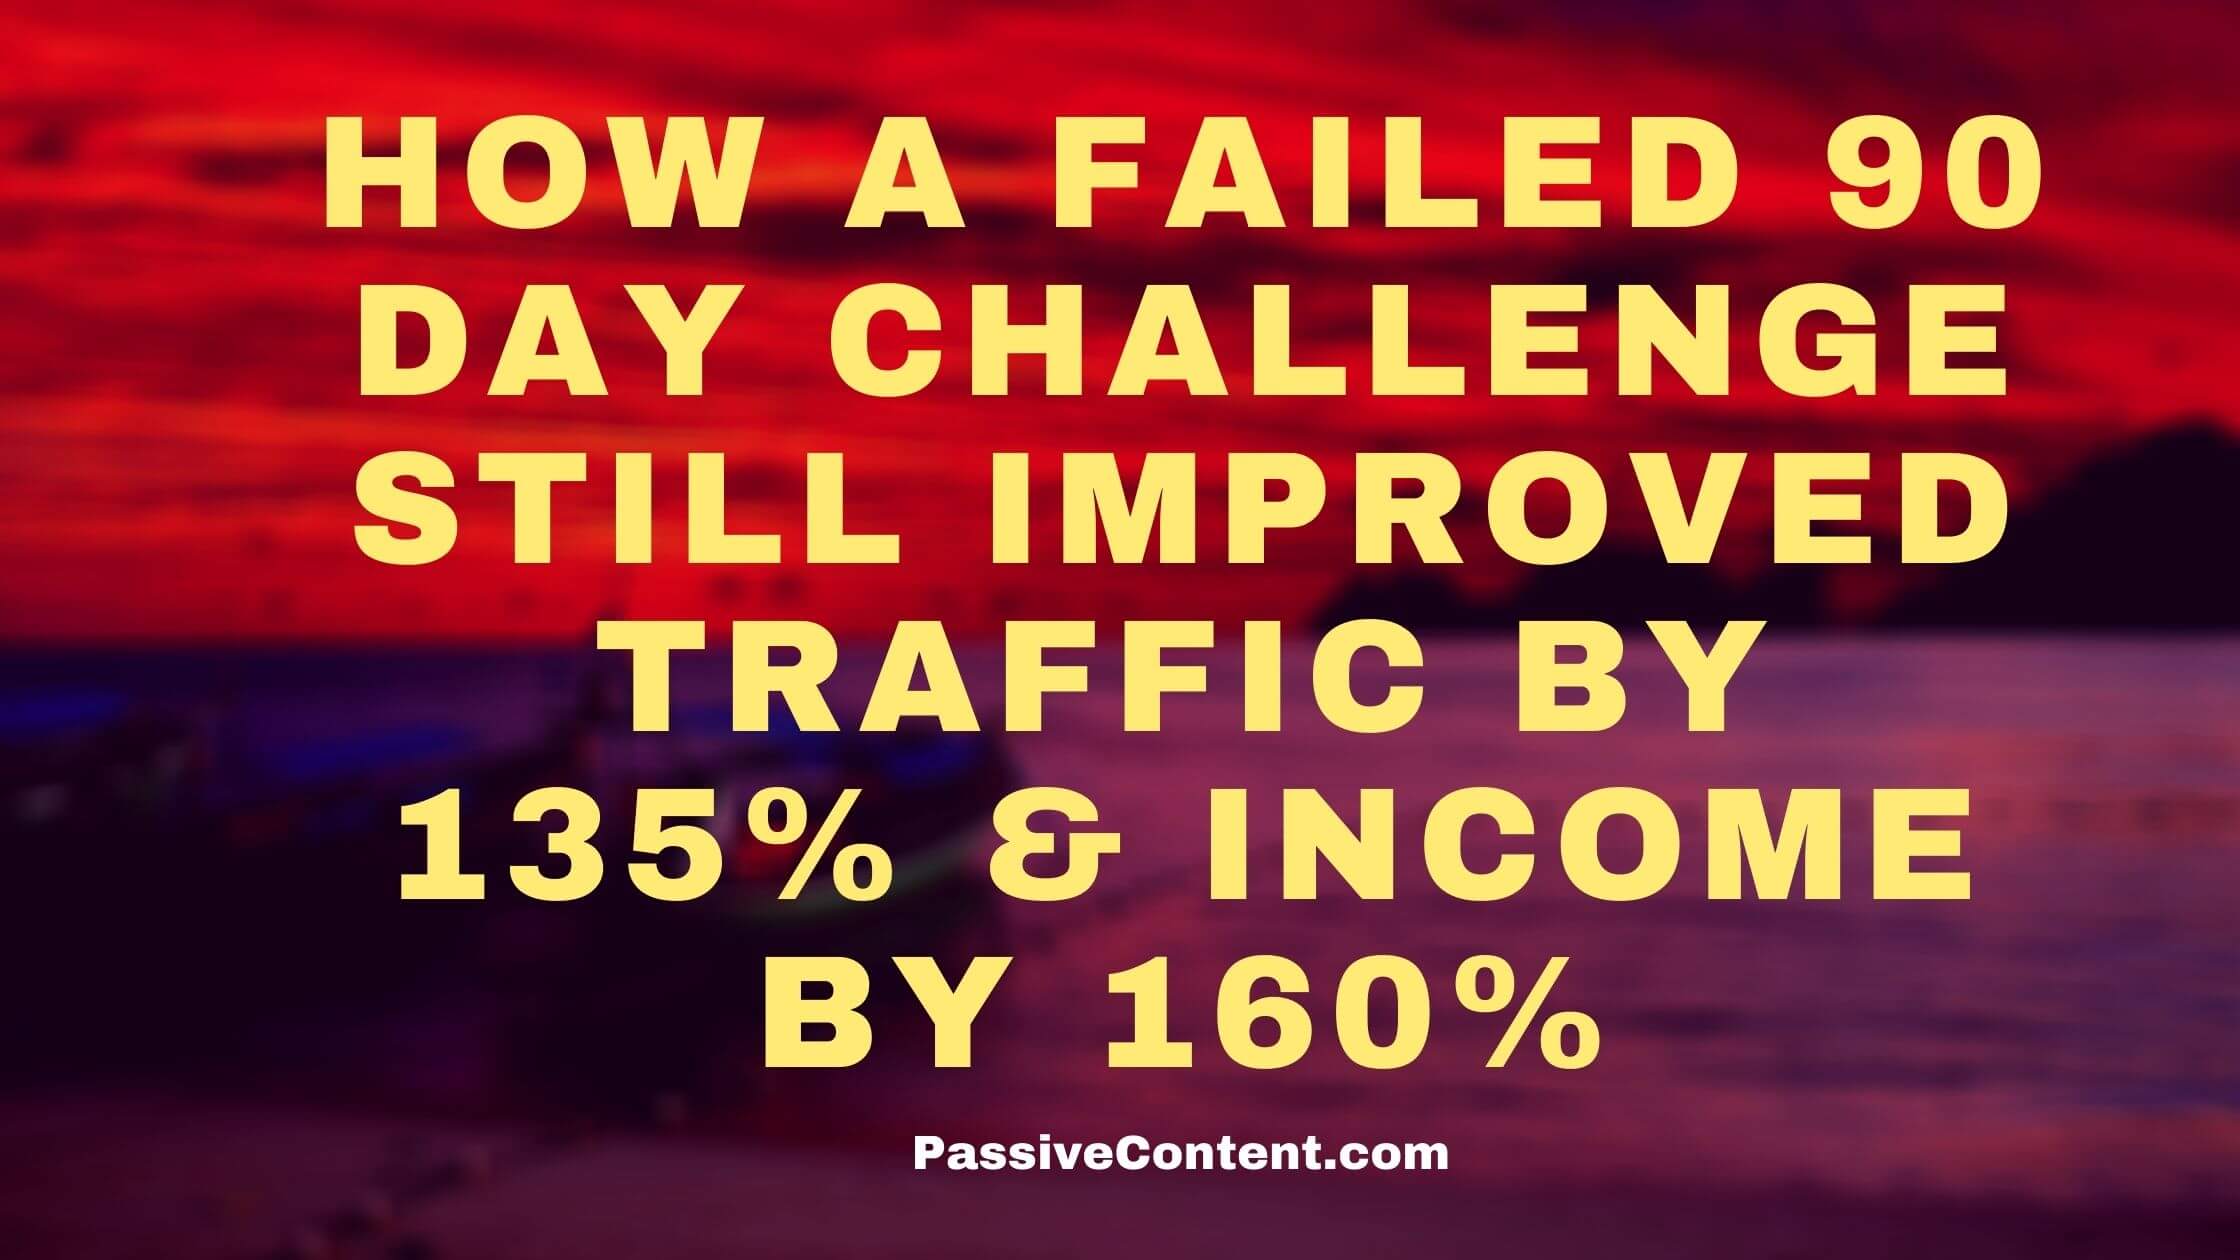 How a Failed 90 Days Niche Site Challenge Still Produced 135% Traffic Increment and 160% Income Growth